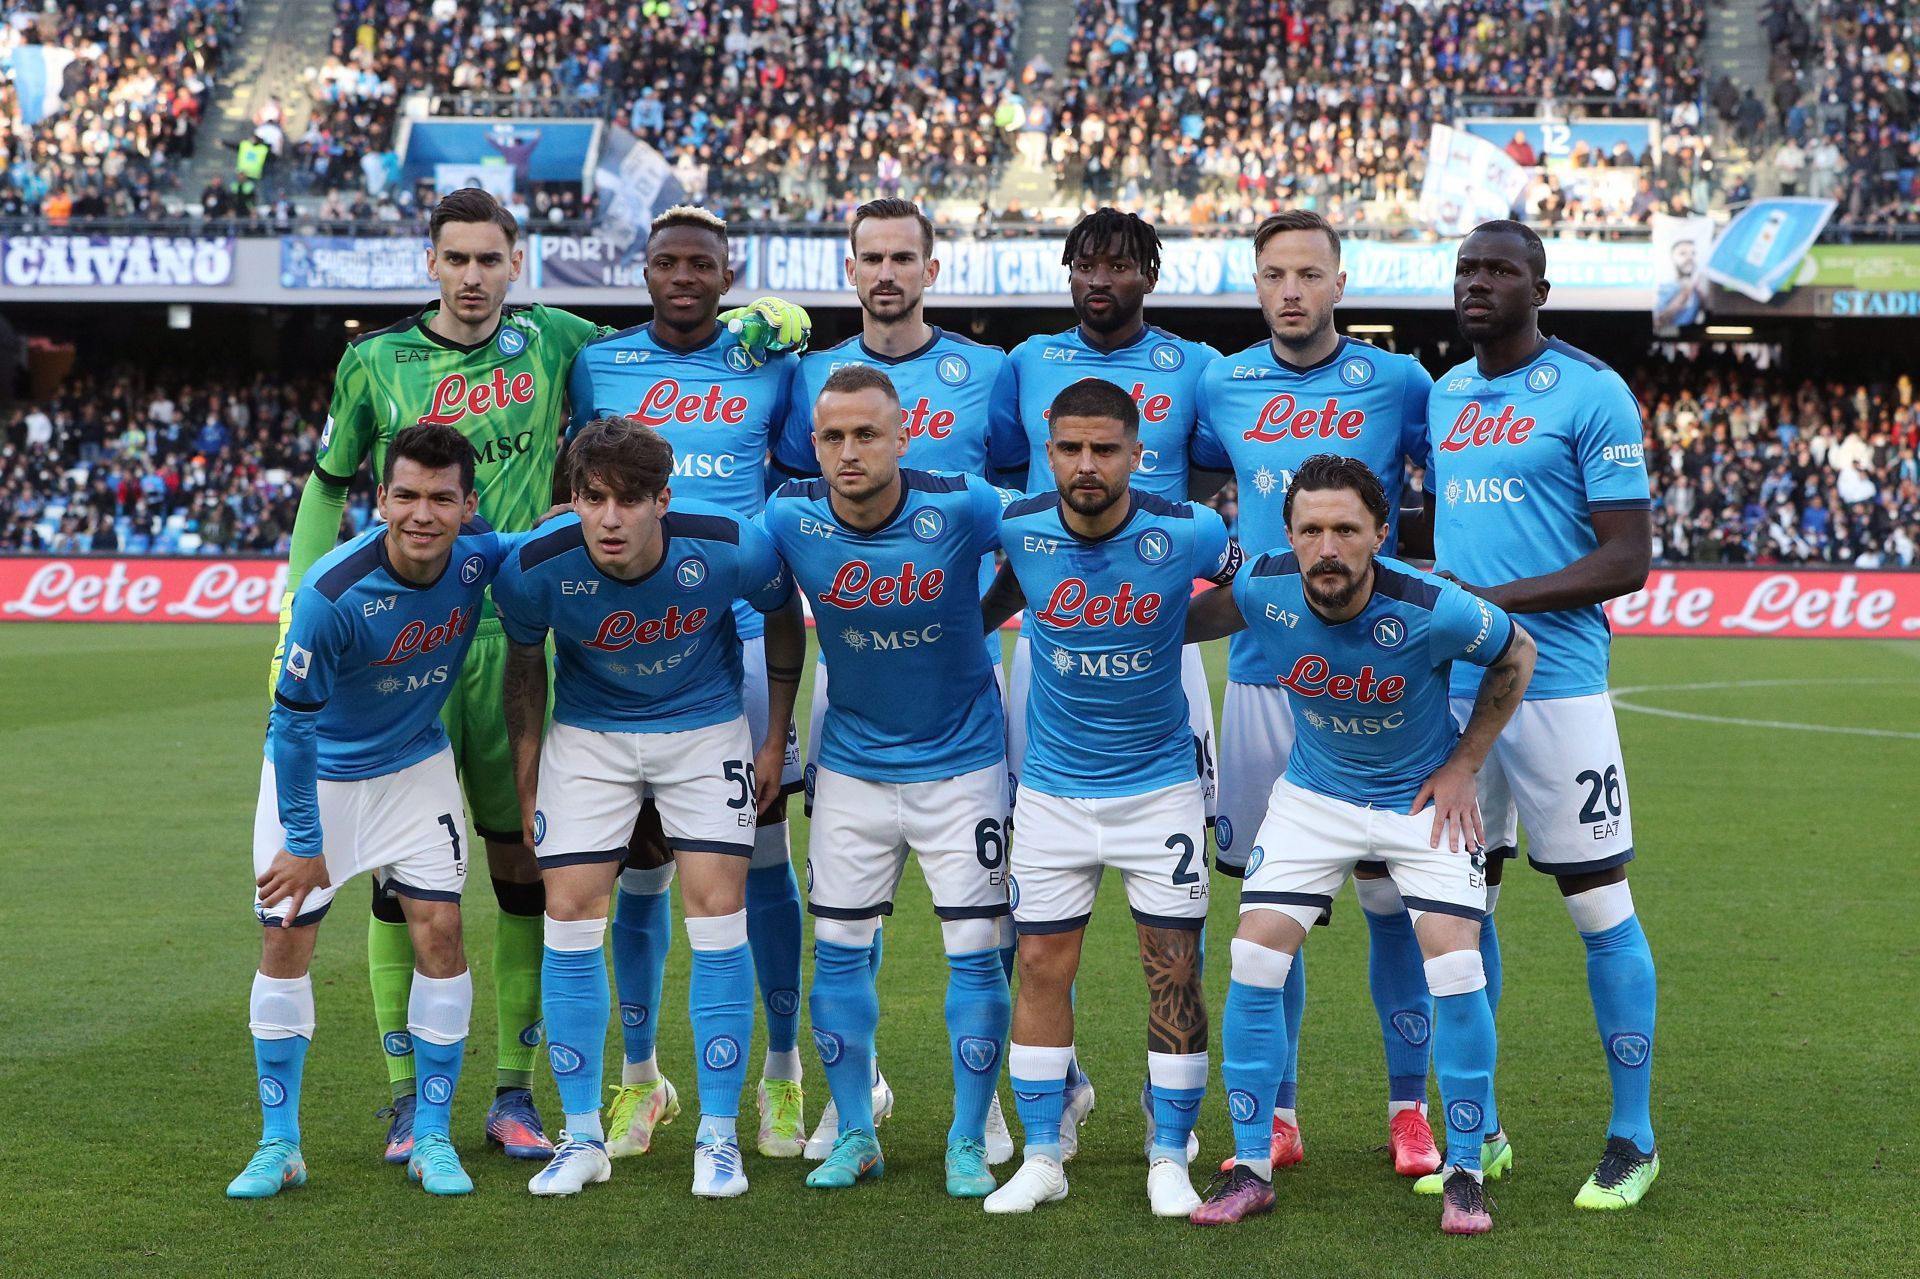 Napoli play Empoli on Sunday in Serie A